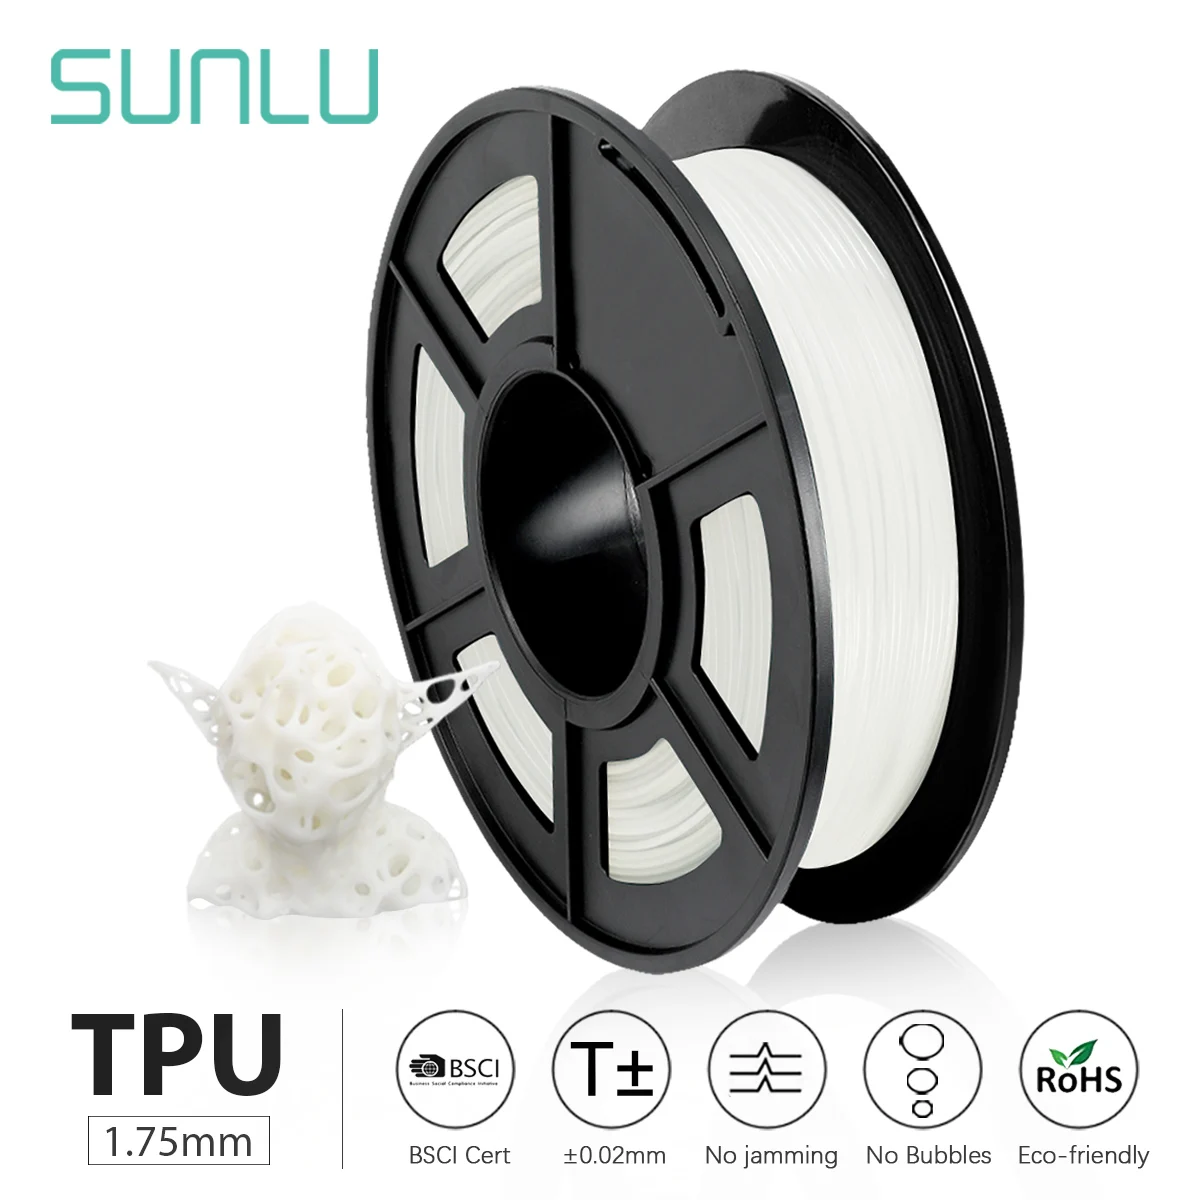 SUNLU TPU 3D Printer Filament Flexible Filament 1.75 mm 0.5kg /Roll 95A Shore Hardness Good For Printing Child Shoes And Toys